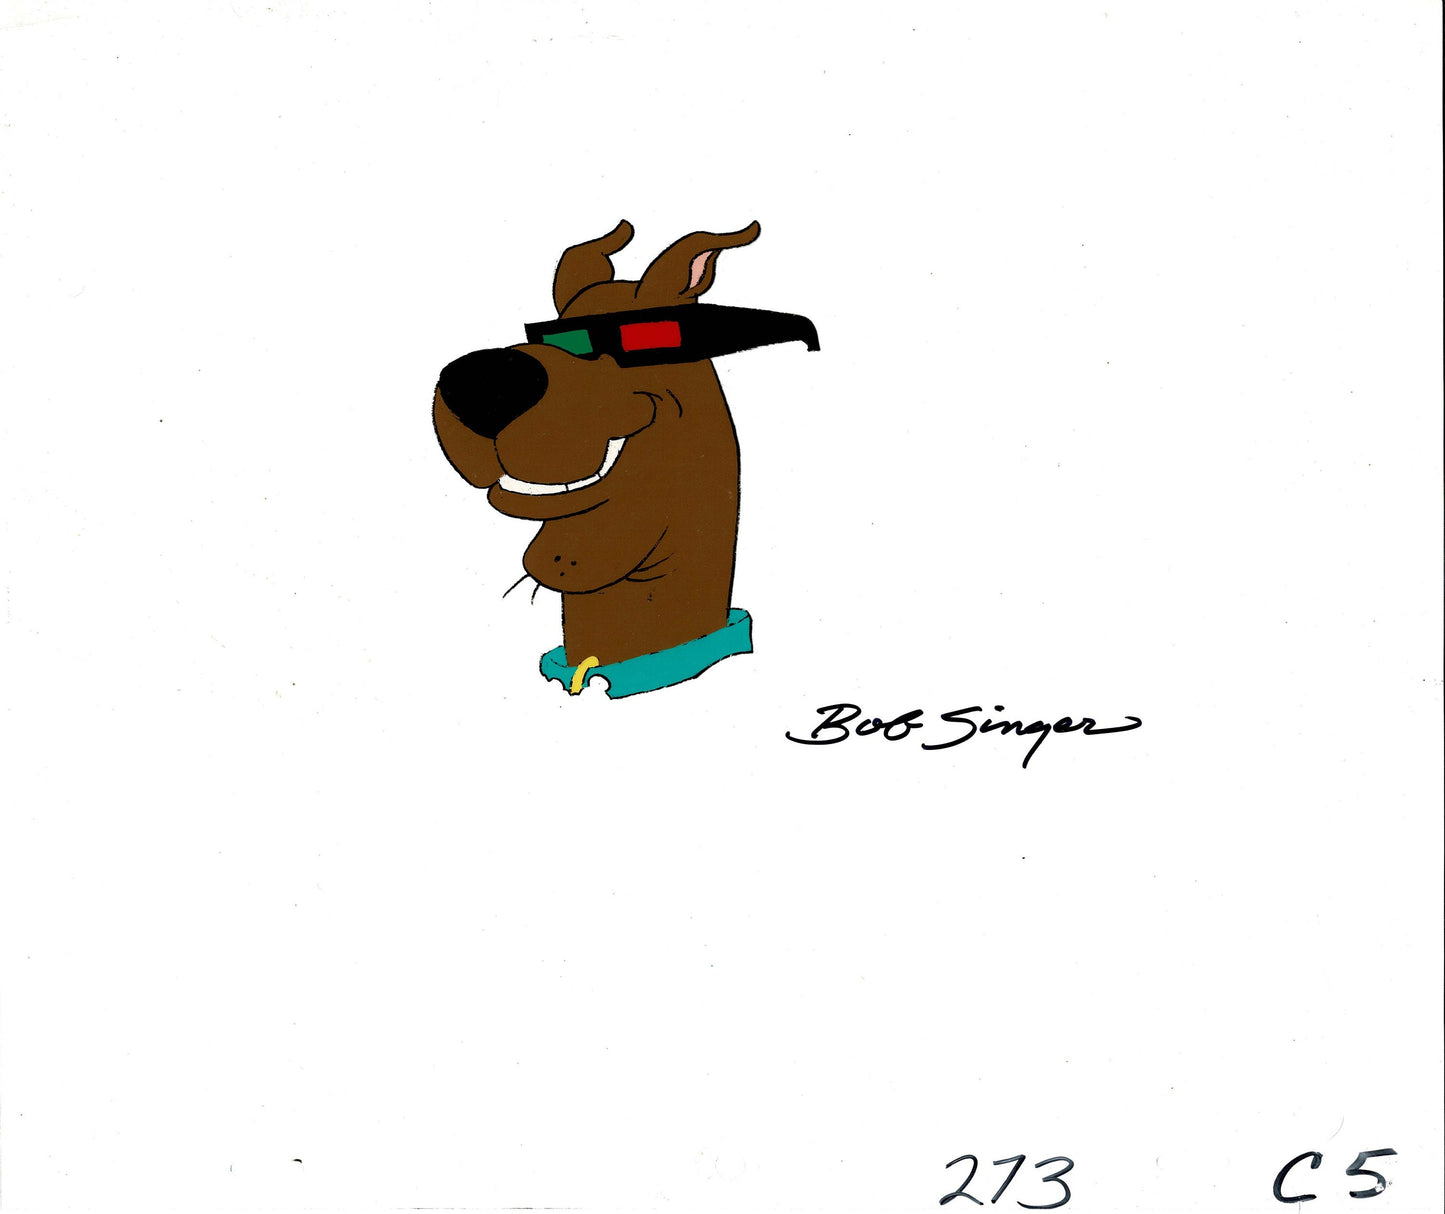 Scooby Doo Production Animation Cel of Scooby with 3D Glasses from Hanna Barbera Signed by Bob Singer